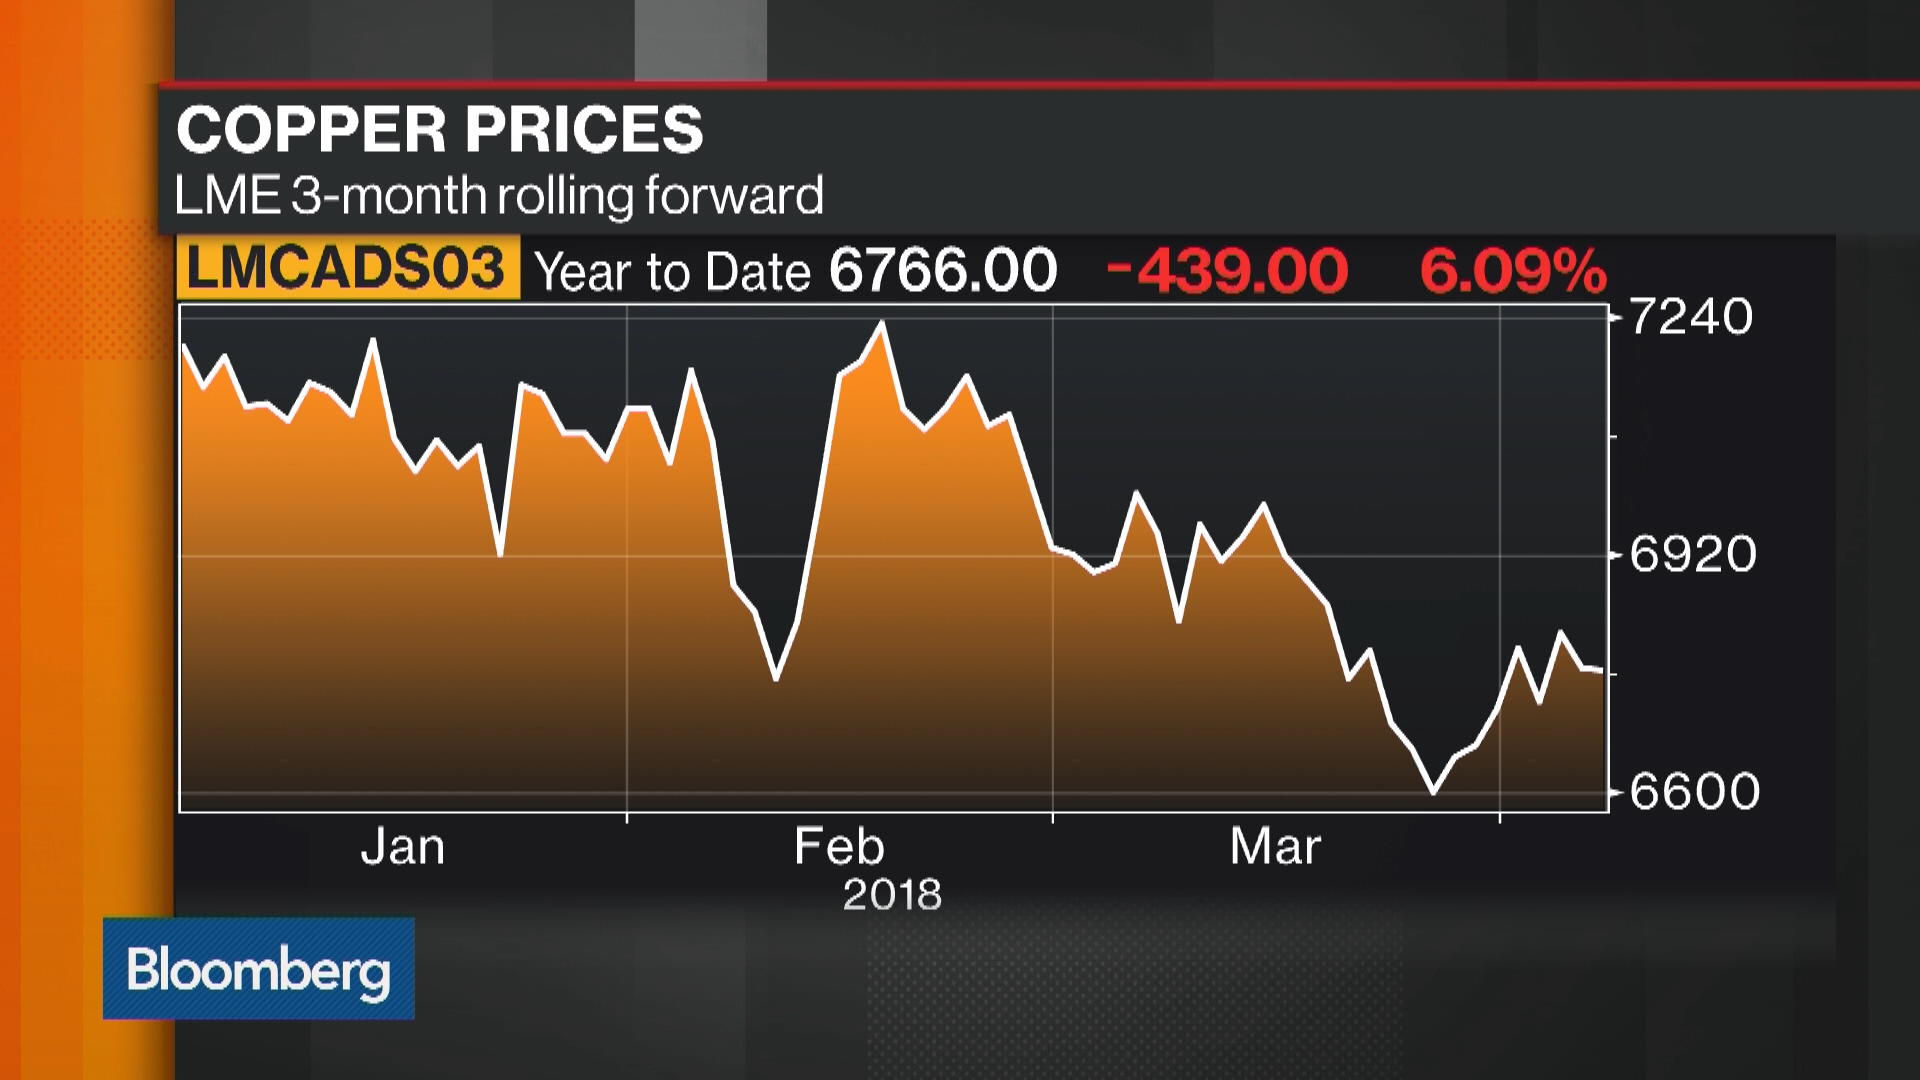 Could Copper Prices Rise? Bloomberg